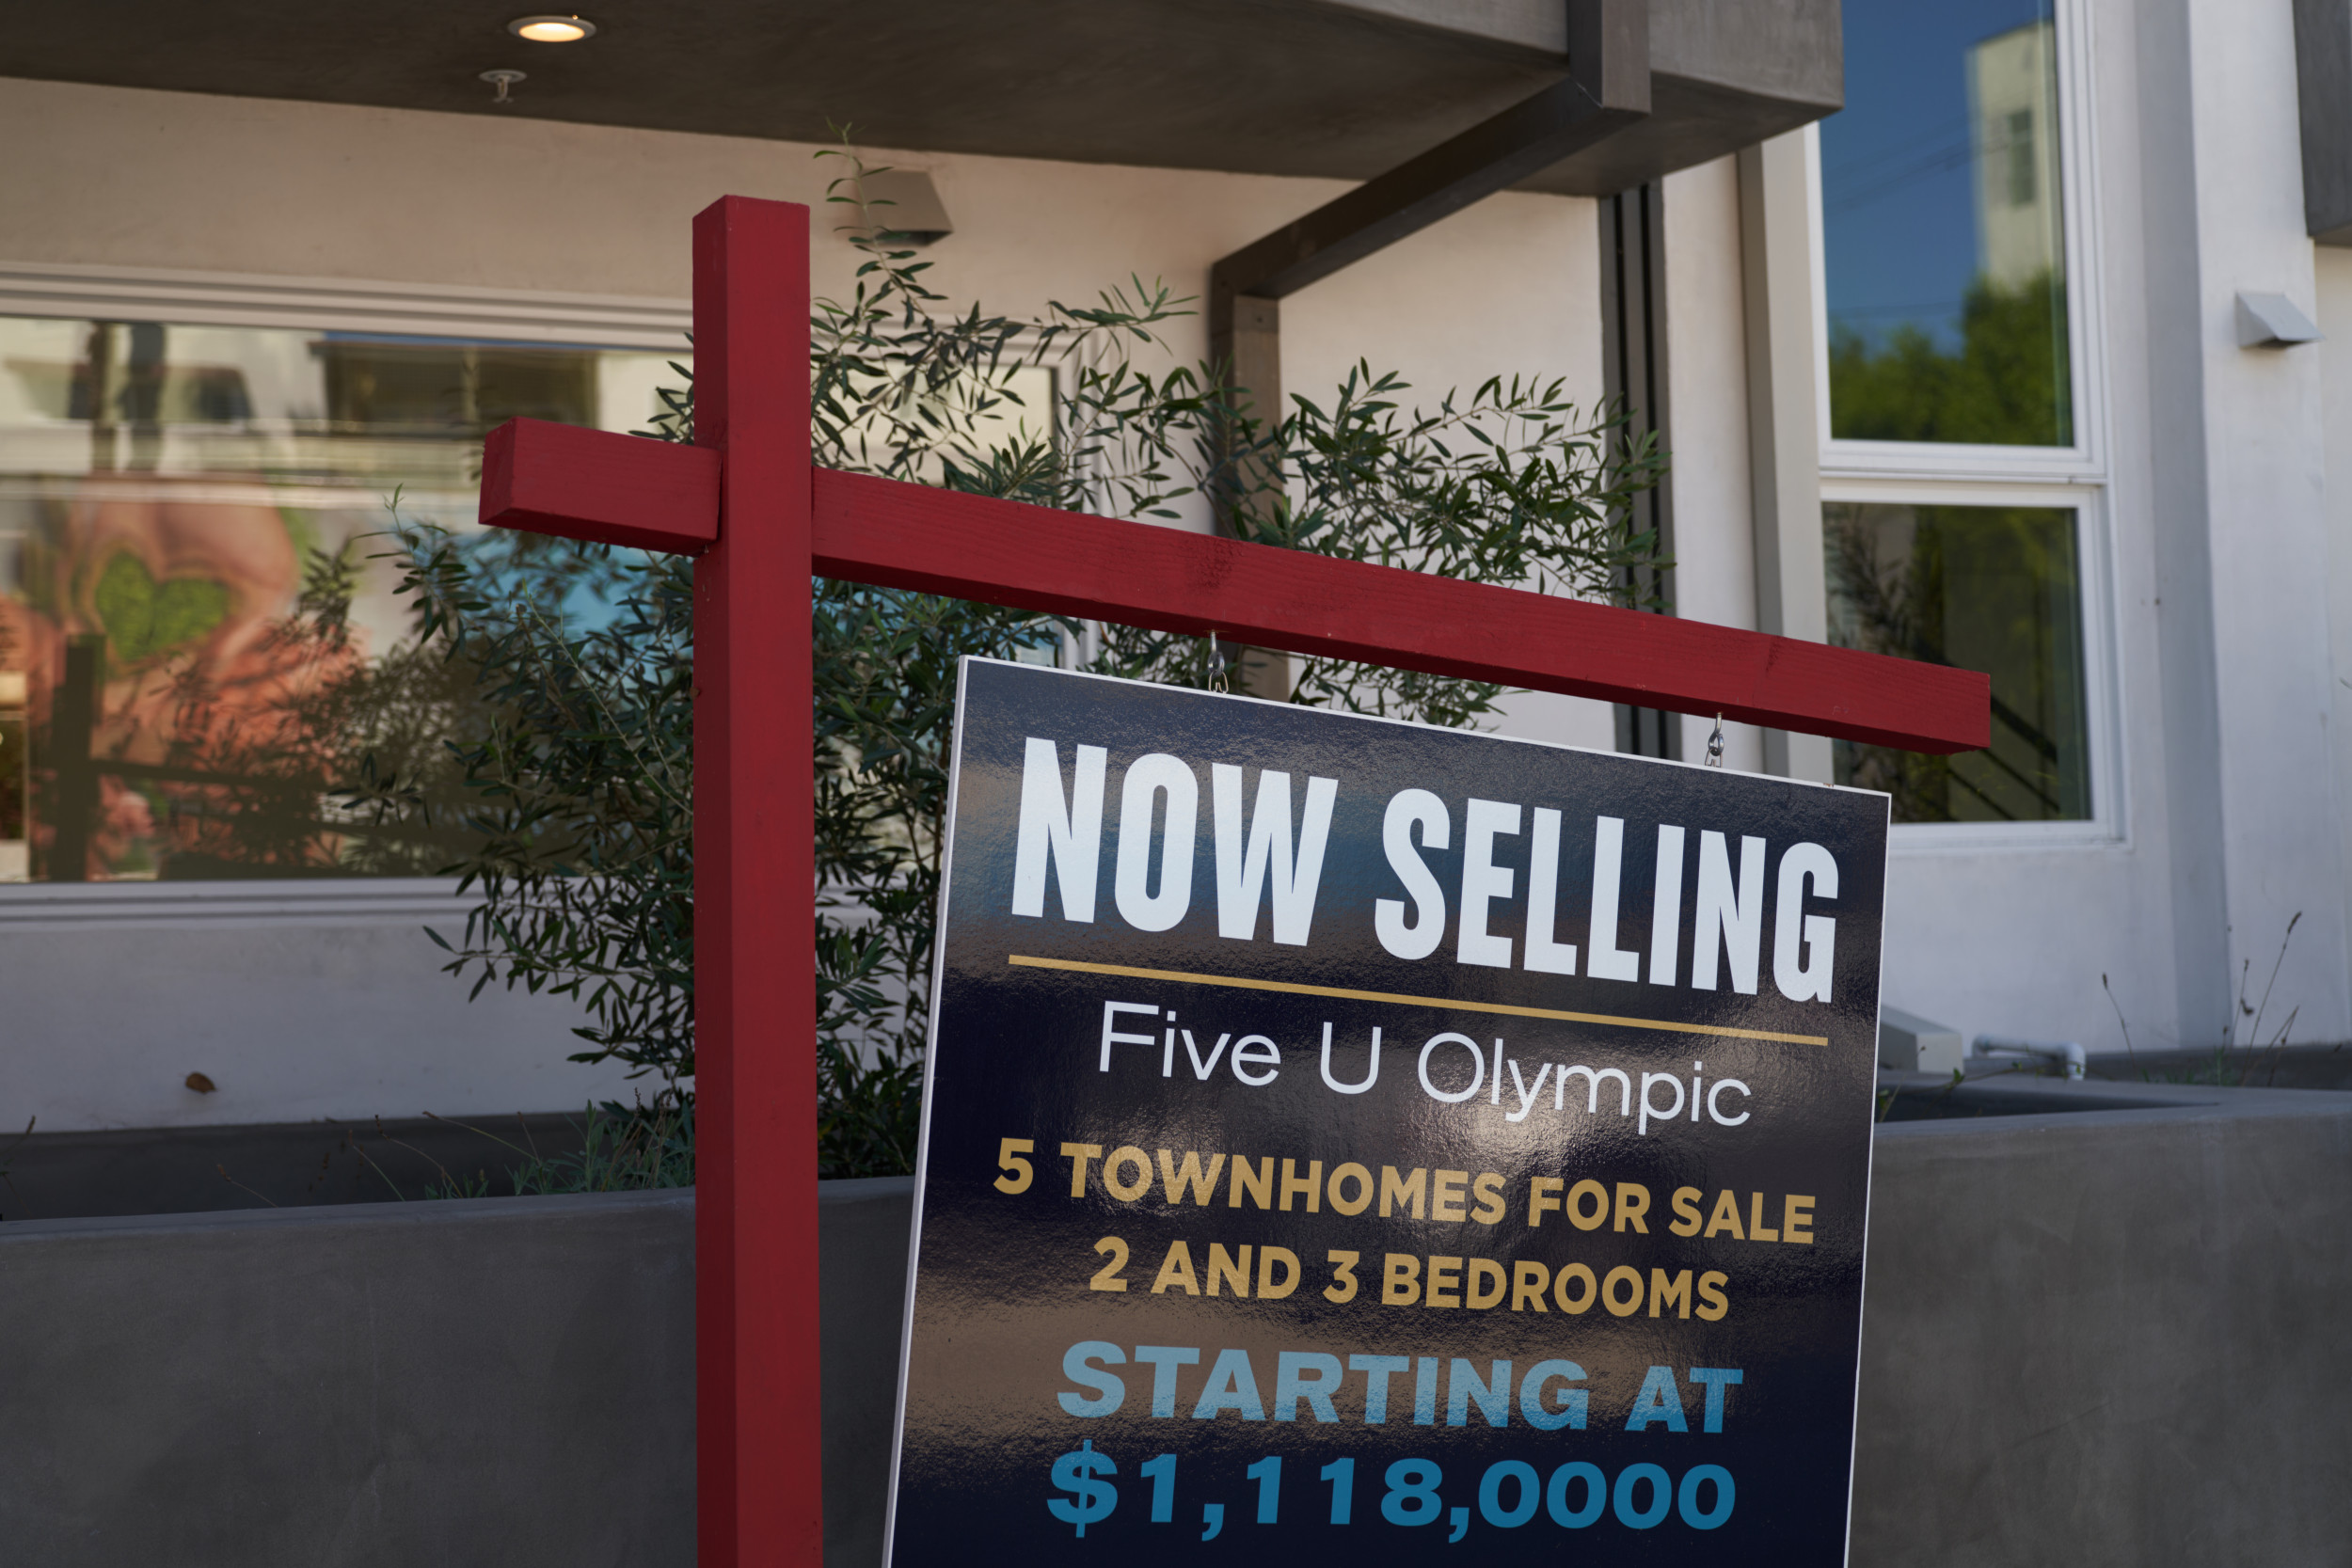 California Gives Homebuyers $150,000 to Buy Houses